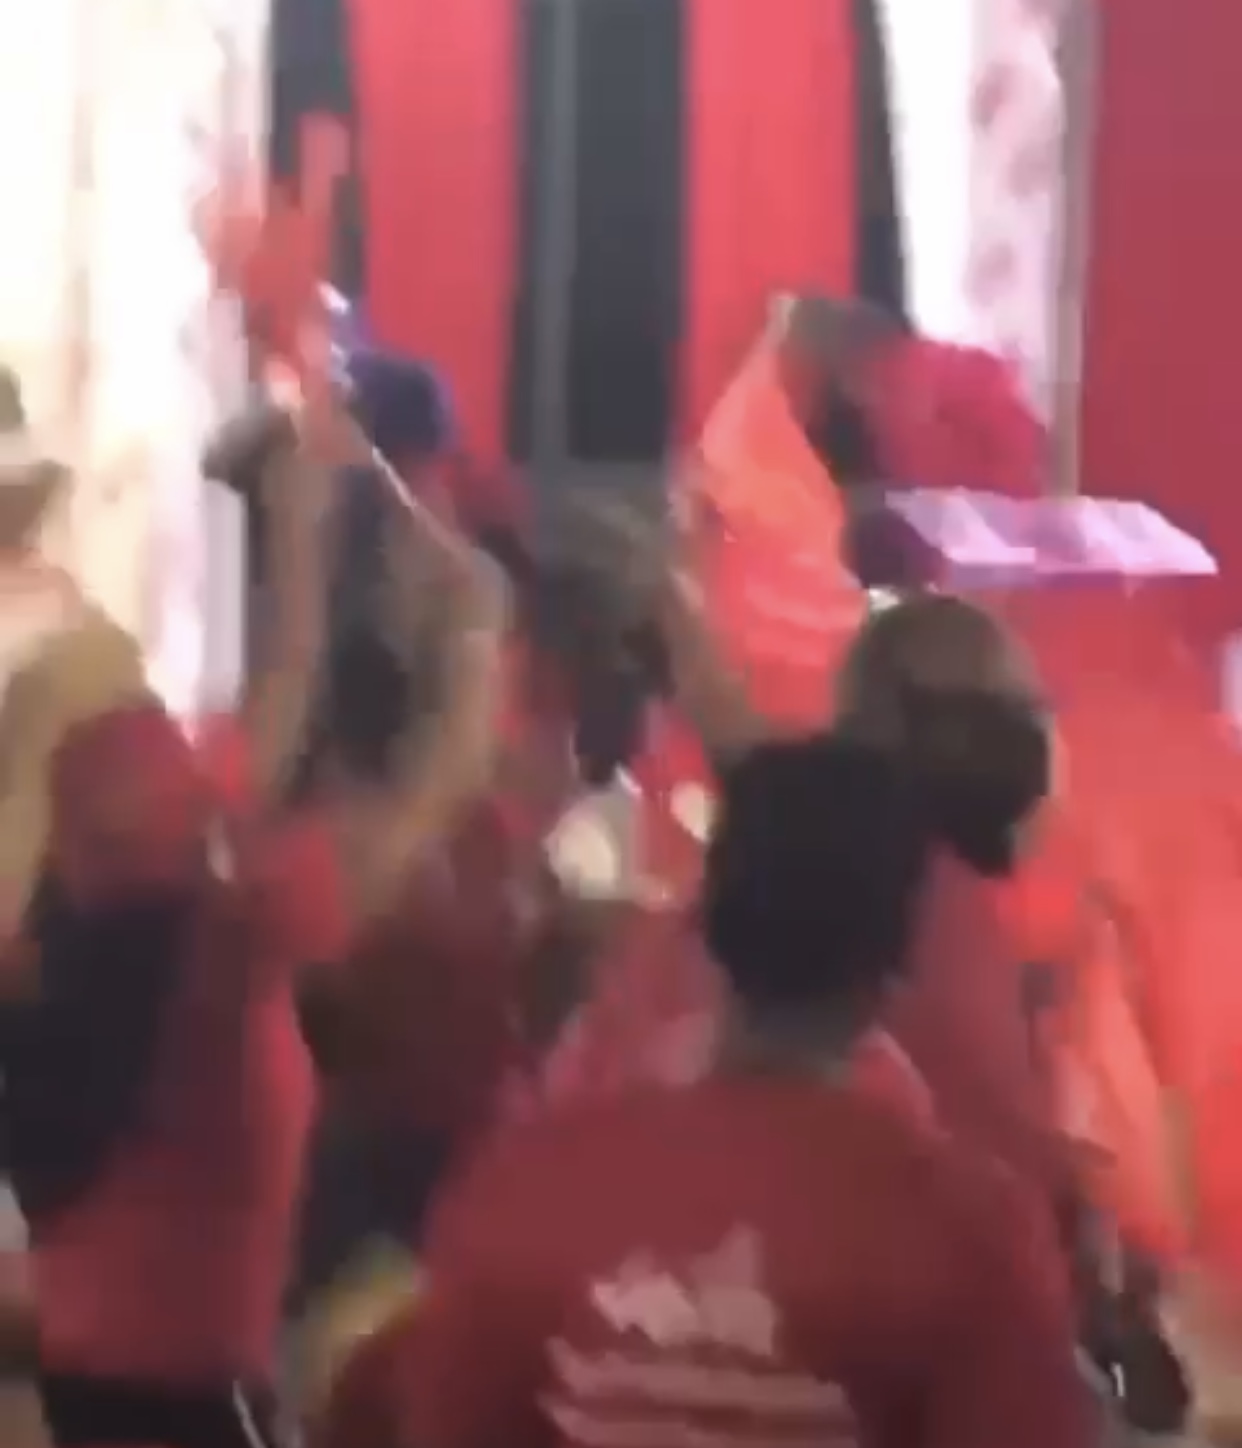 PNM Tobago campaign video goes viral